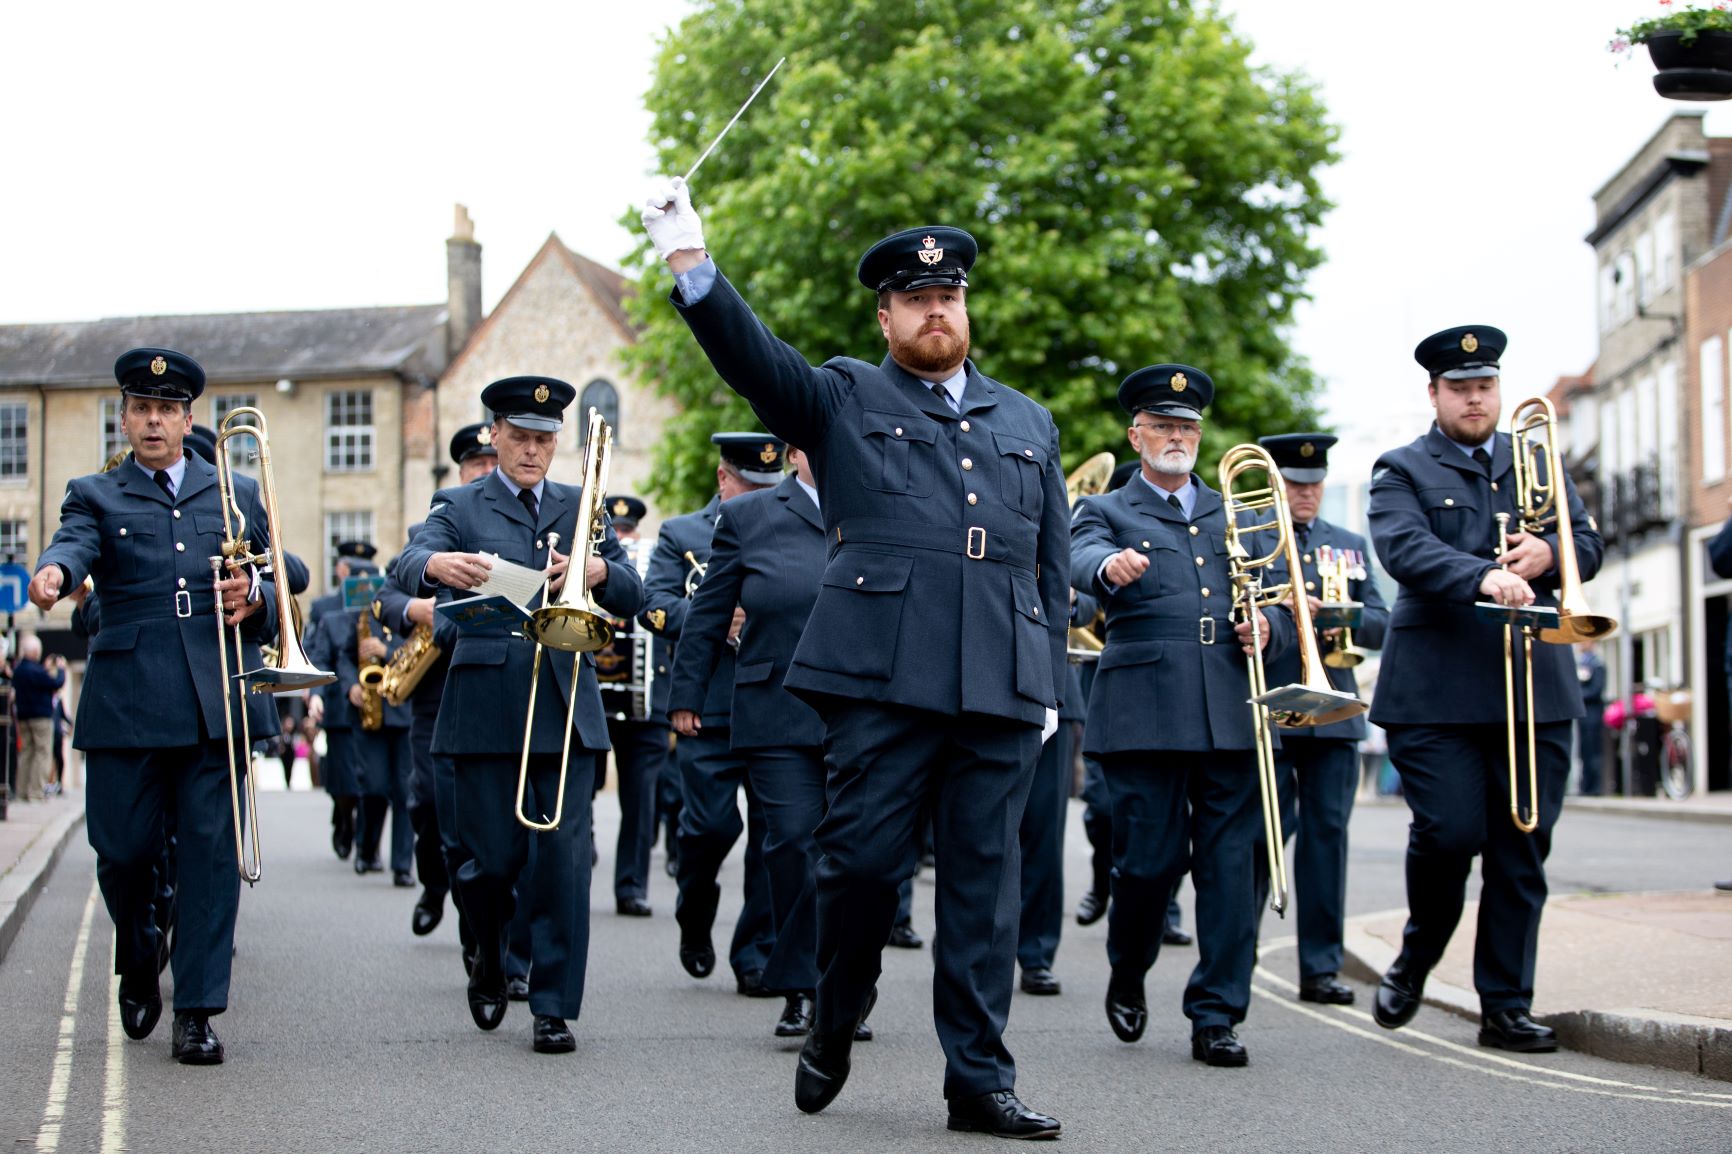 RAF Musicians parade through streets with brass instruments.